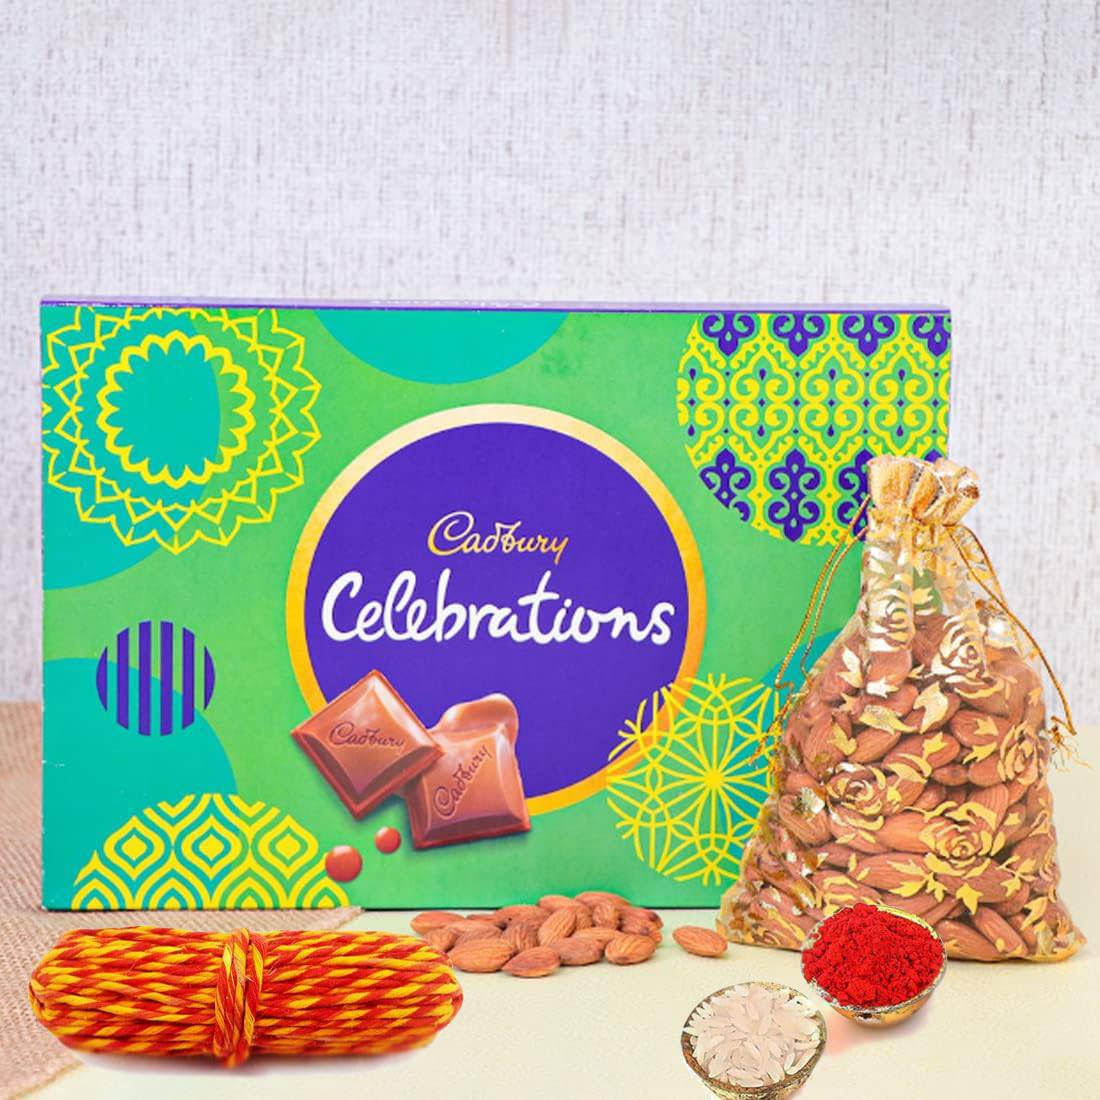 Bhai Dooj Gift Set for Brother with Cadbury Celebrations Chocolates & Dry Fruit Almonds 100g - Bhai Dooj Tika Diwali Gift Combo Pack Hamper Diwali Gifts for Family and Friends Employees Staff Clients - YuvaFlowers